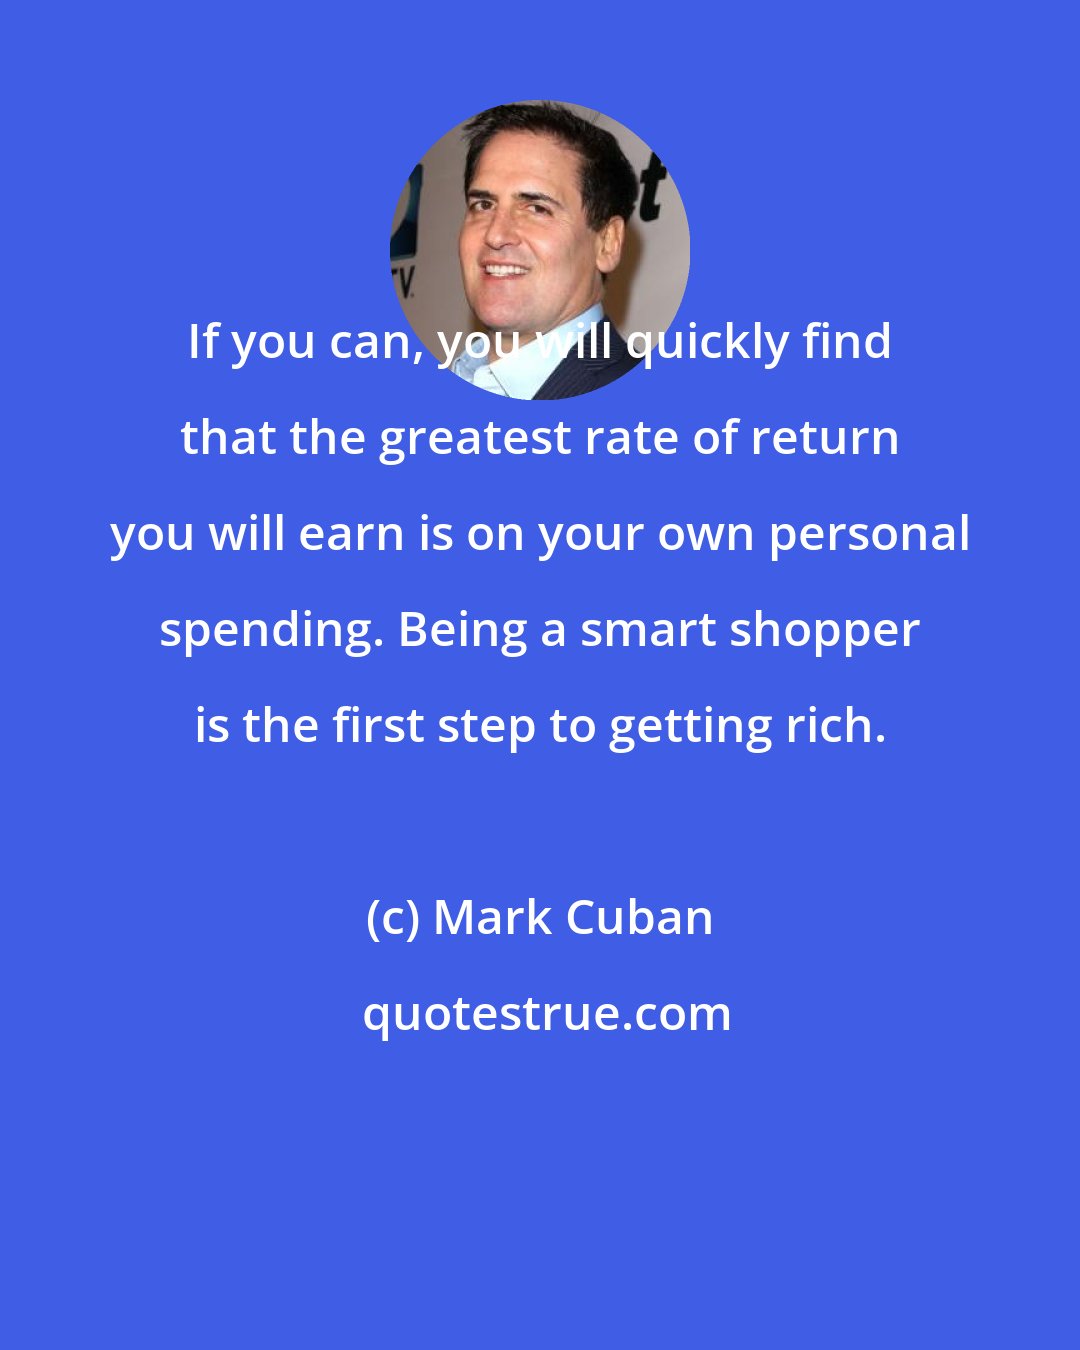 Mark Cuban: If you can, you will quickly find that the greatest rate of return you will earn is on your own personal spending. Being a smart shopper is the first step to getting rich.